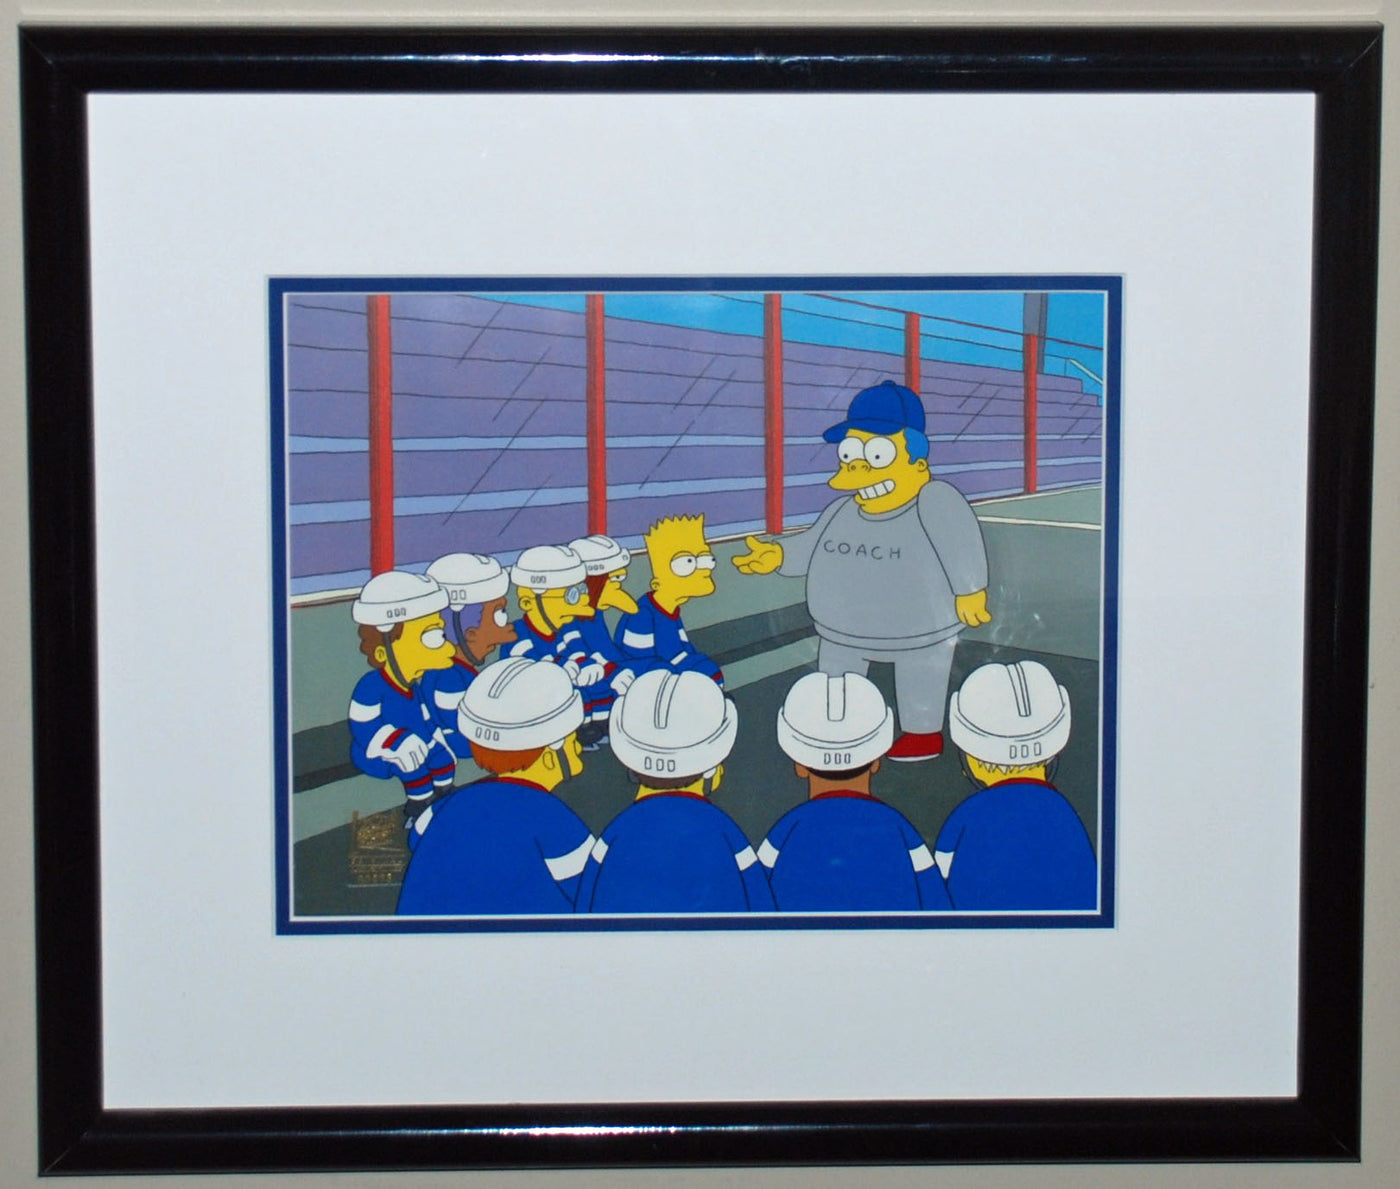 Original Simpsons Production Cel featuring Bart with his hockey team